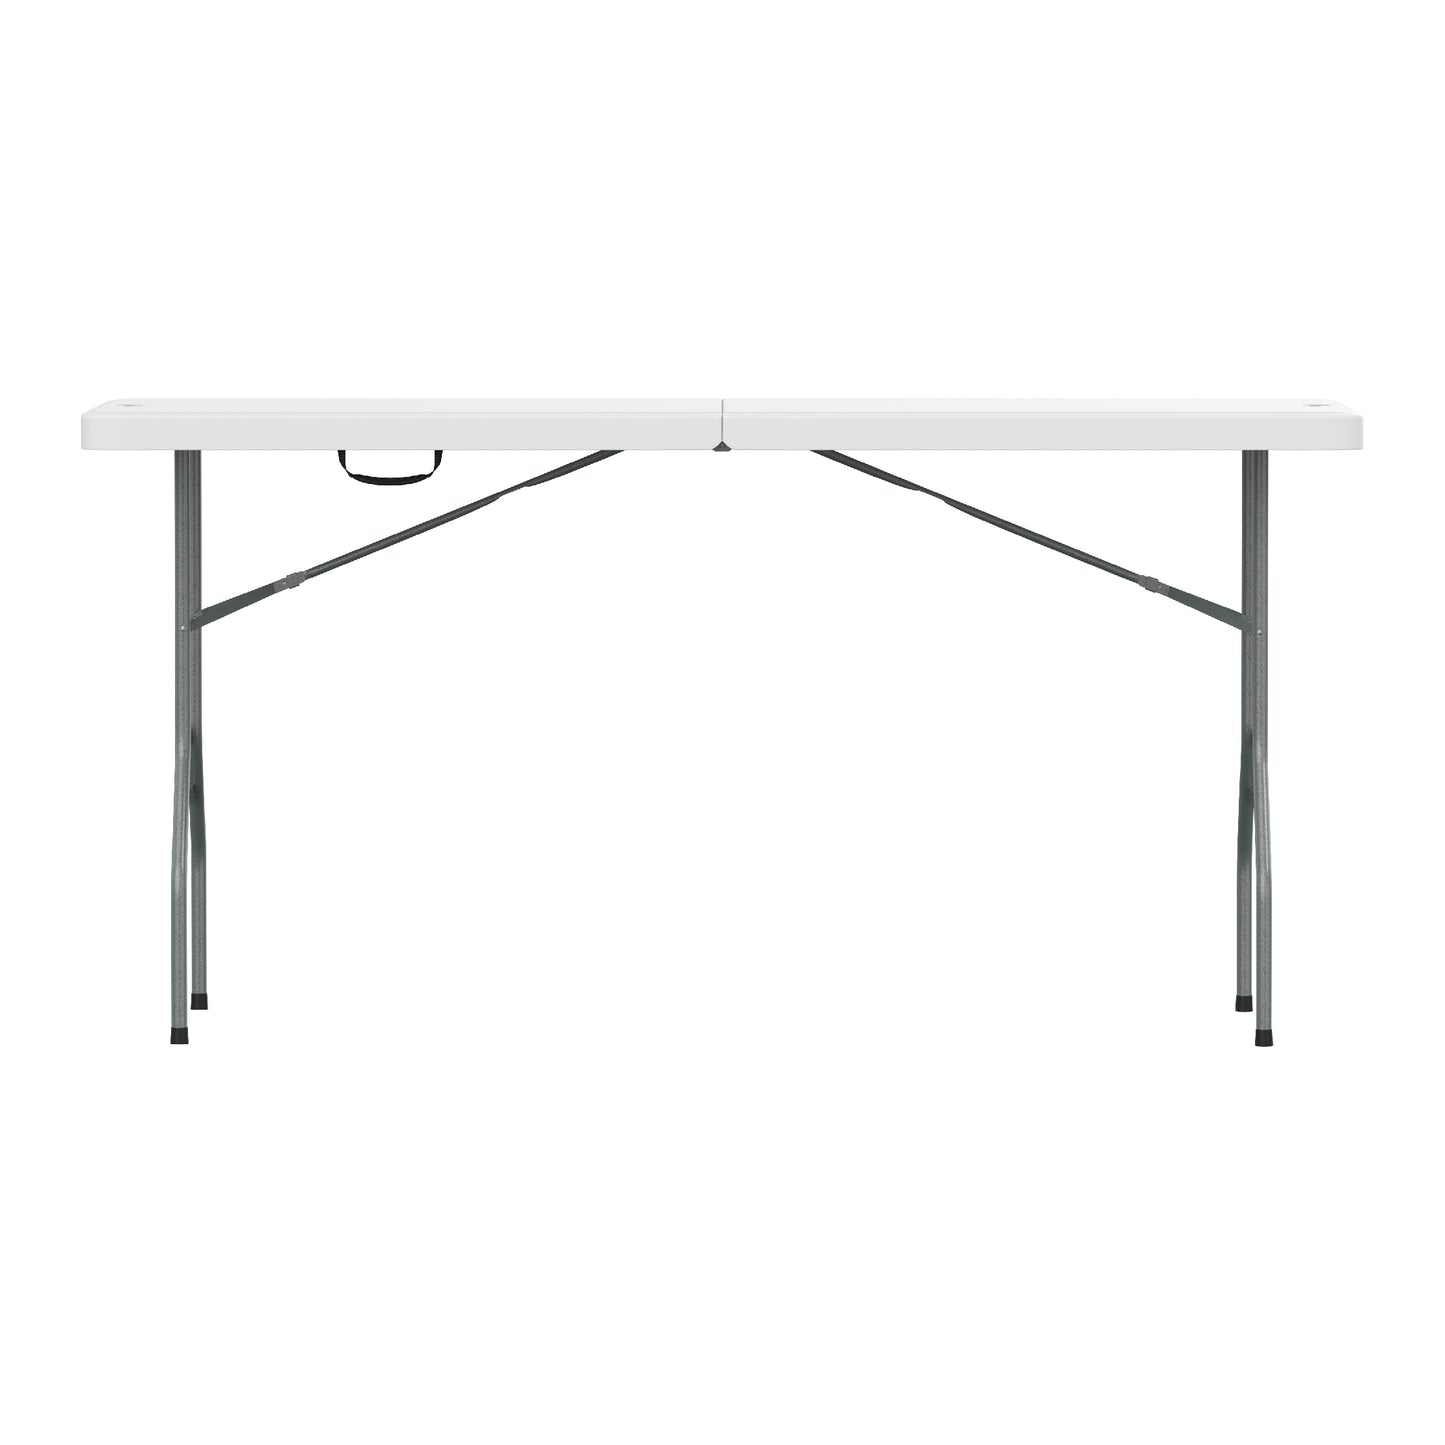 180 cm Folding Picnic Table with Steel Legs